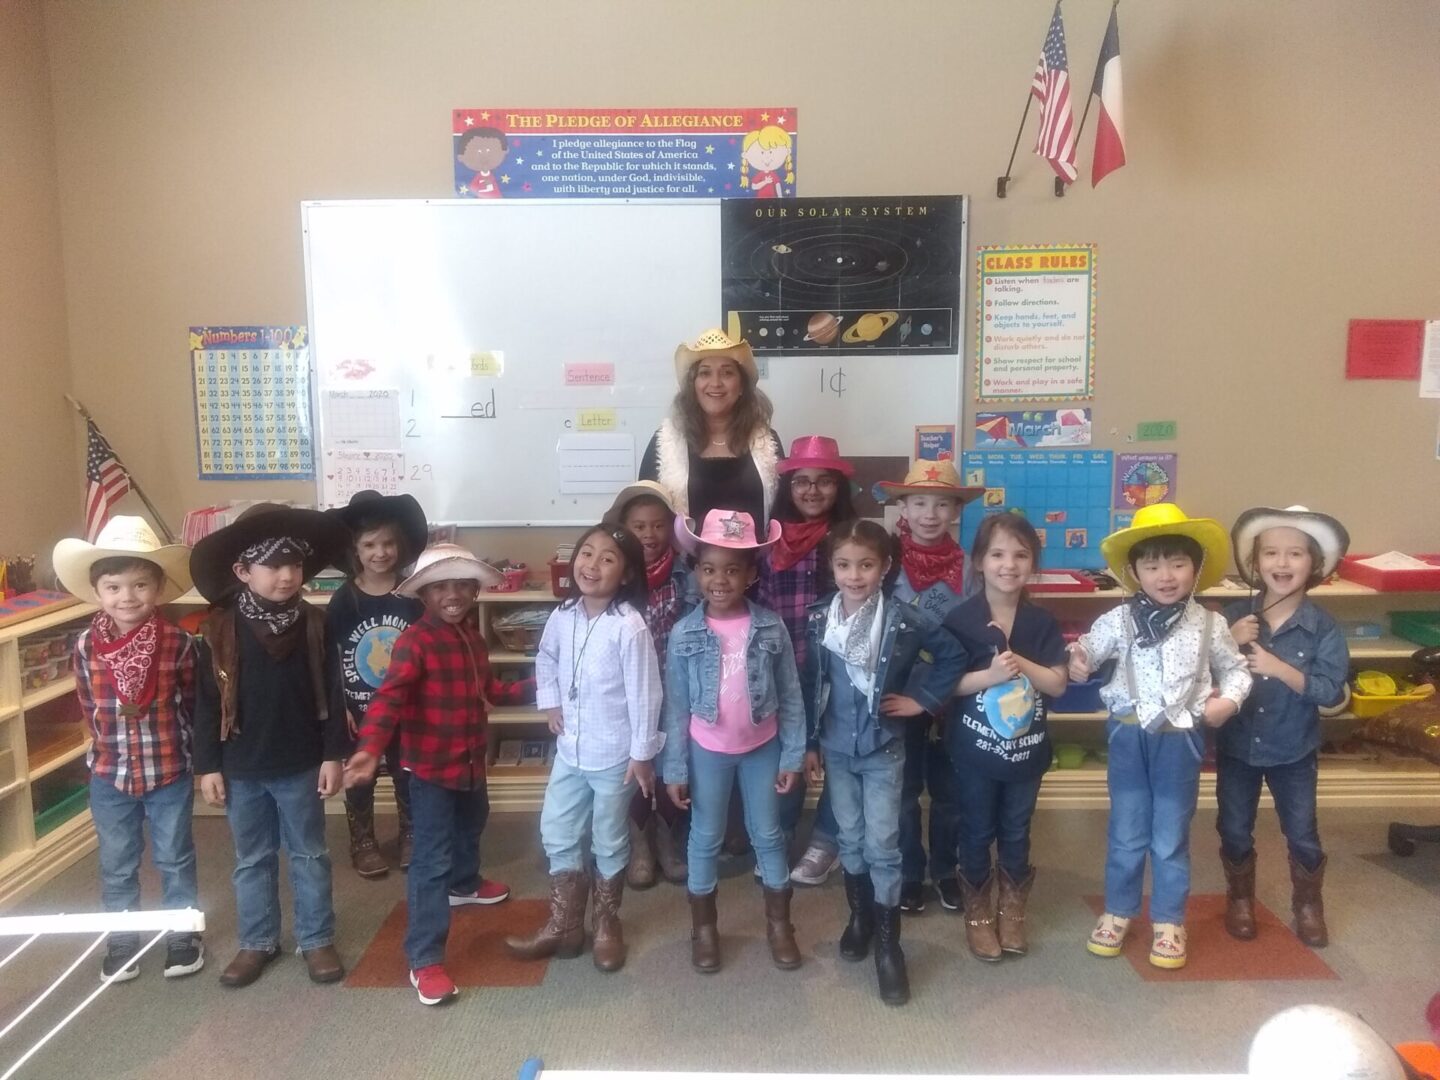 Children wearing cowboy outfits